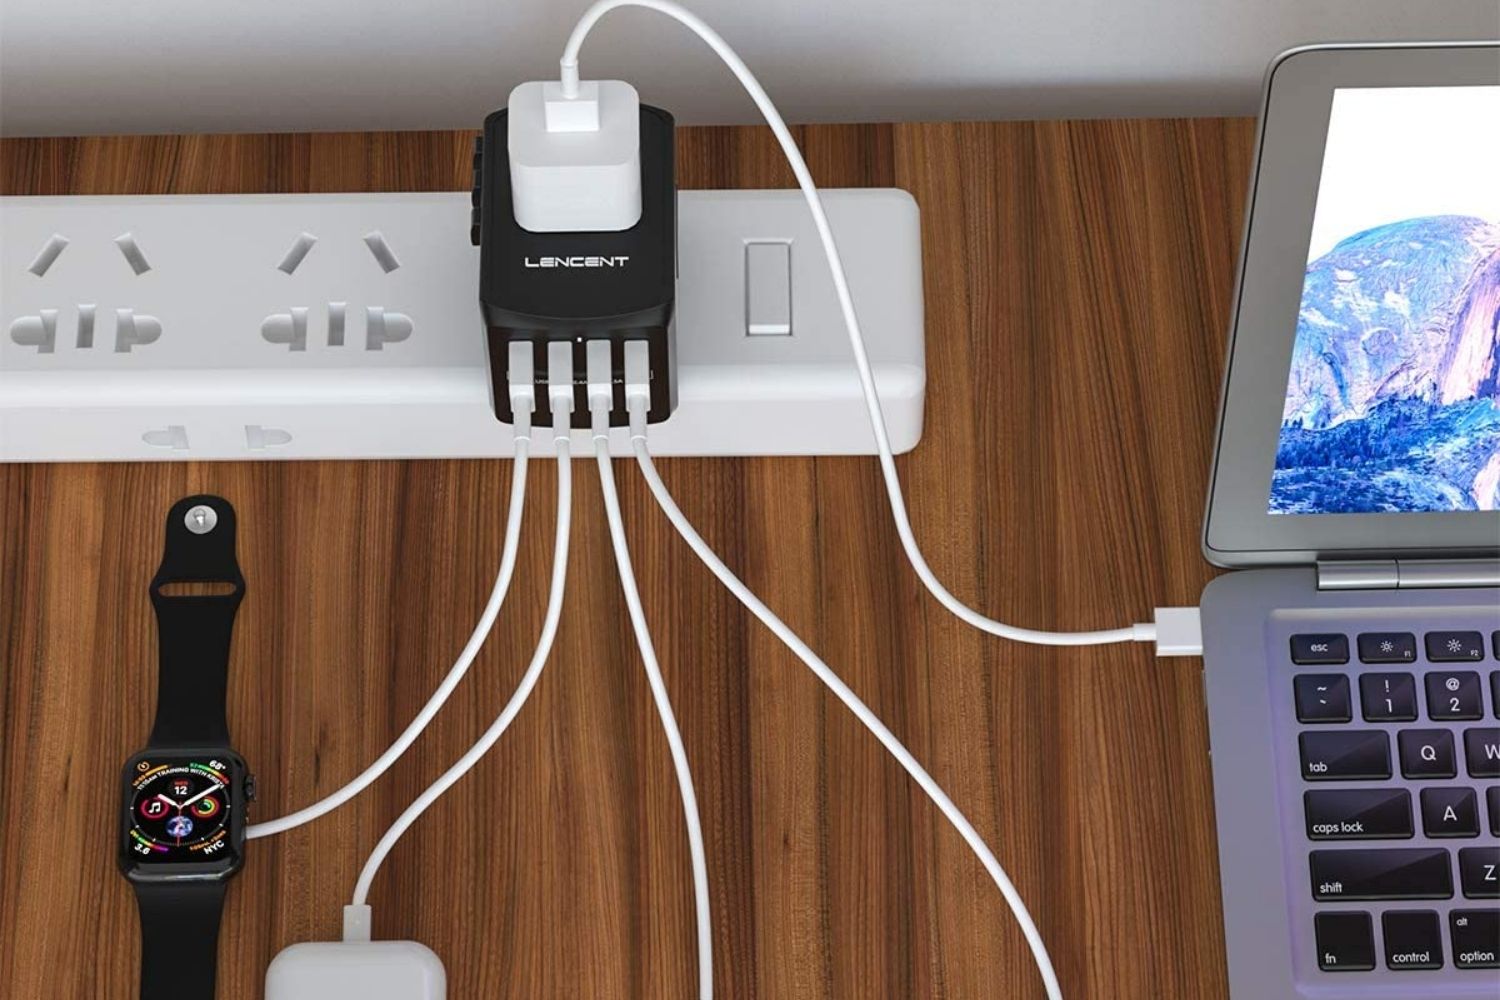 The Best Travel Gifts Option: LENCENT Universal Travel Adapter